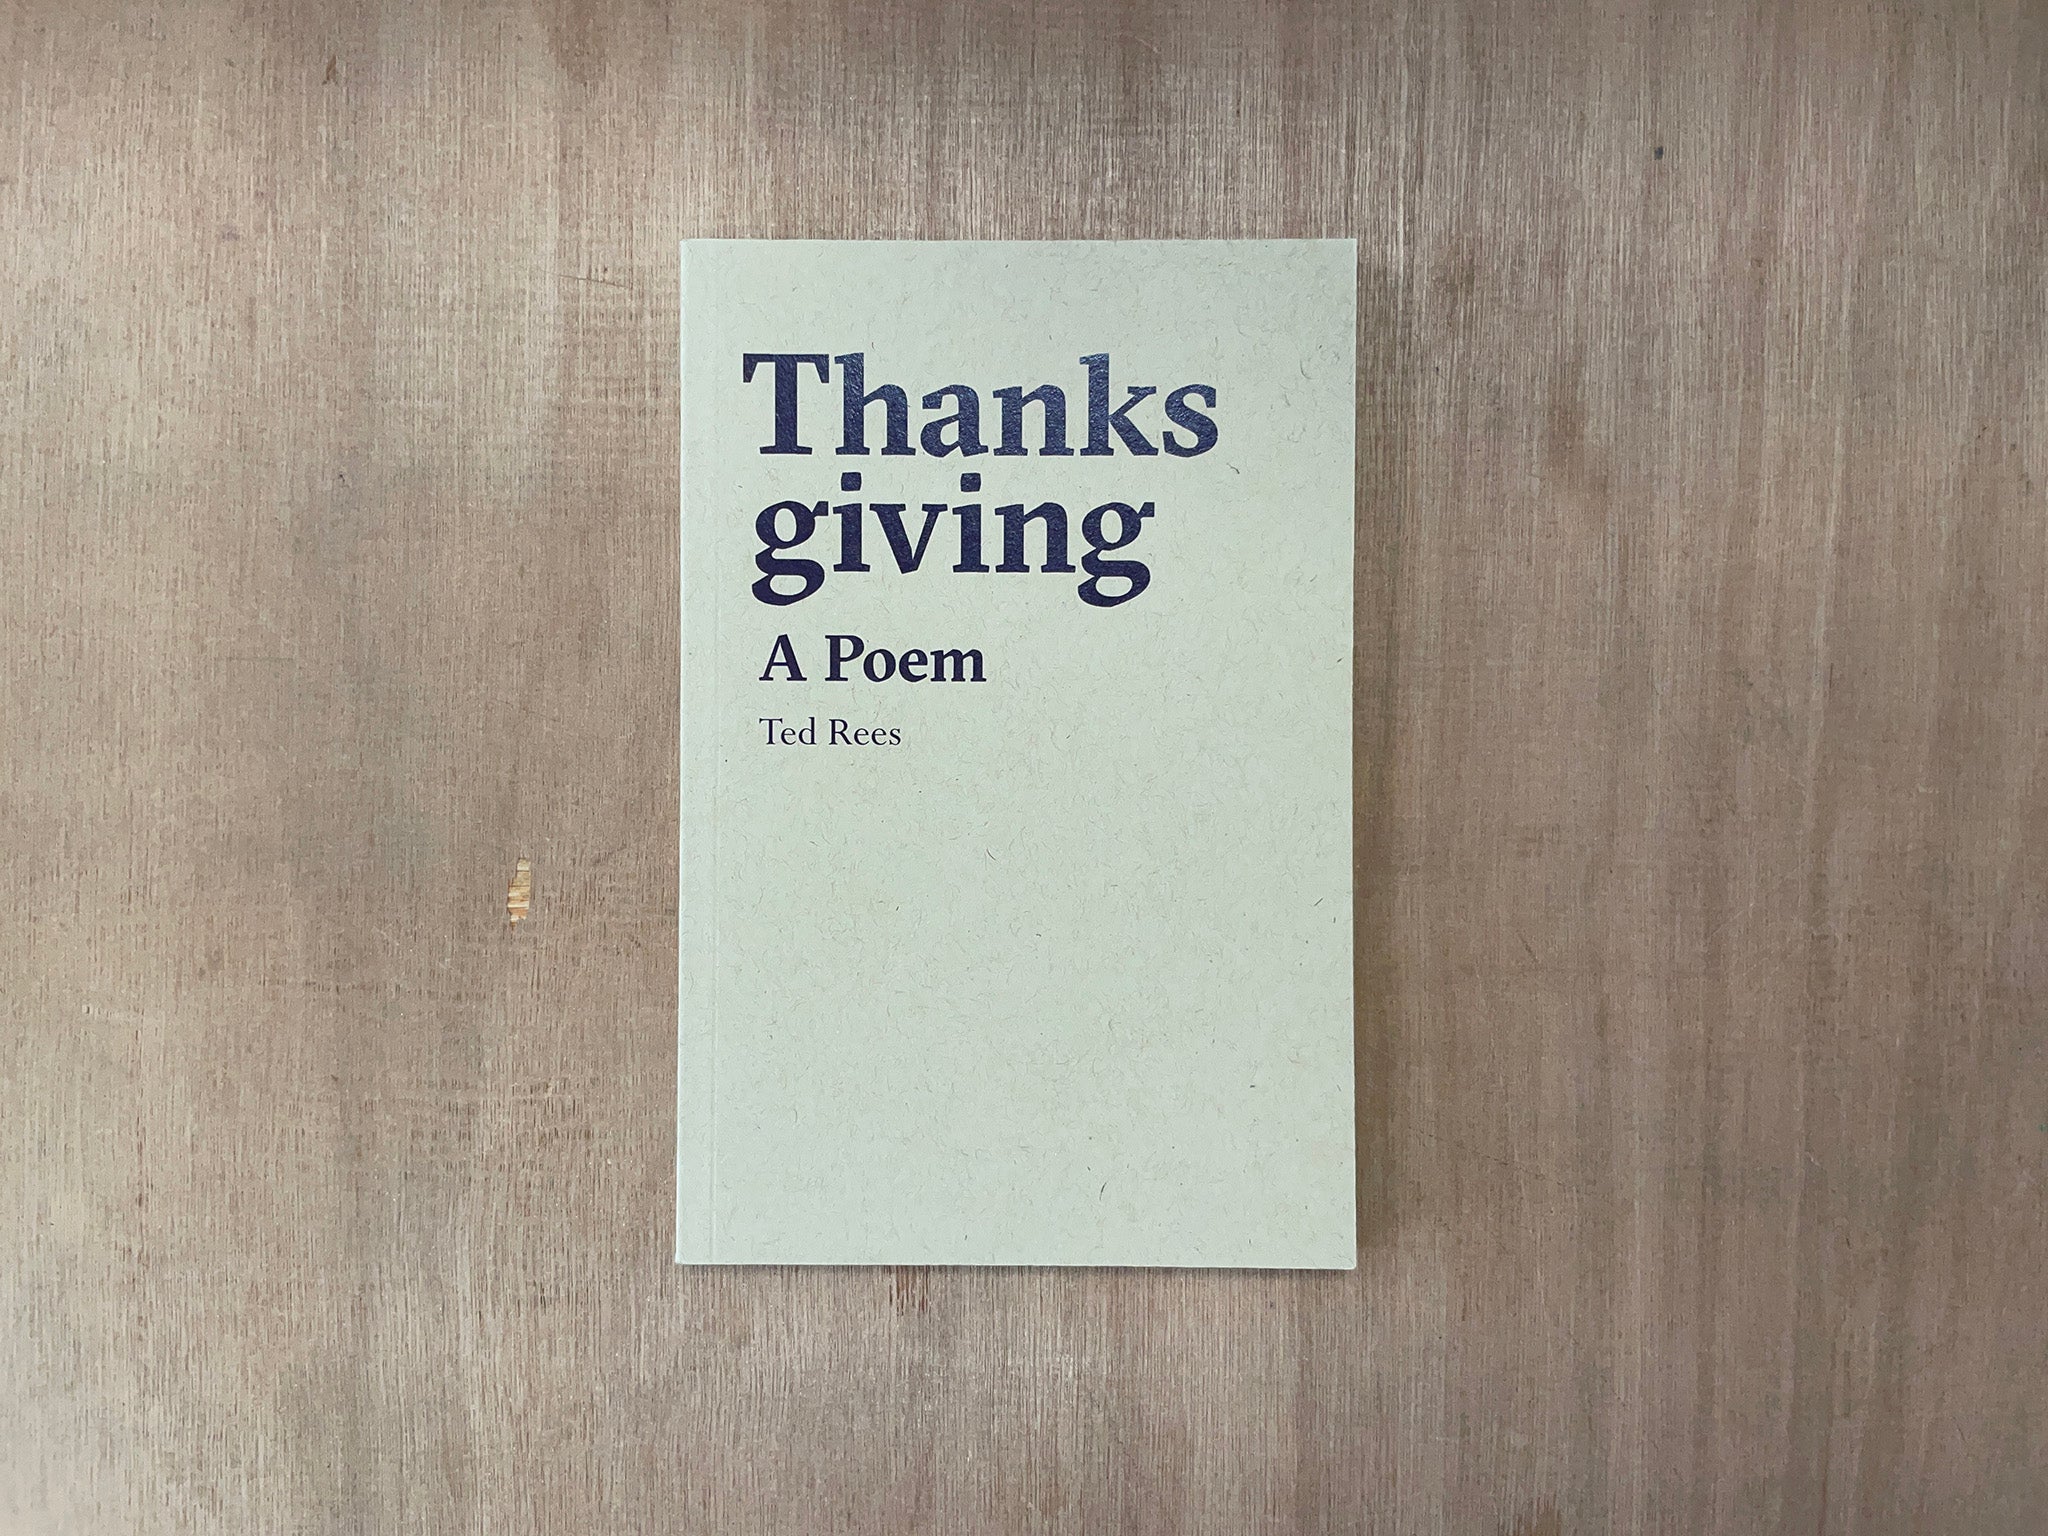 THANKSGIVING: A POEM by Ted Rees